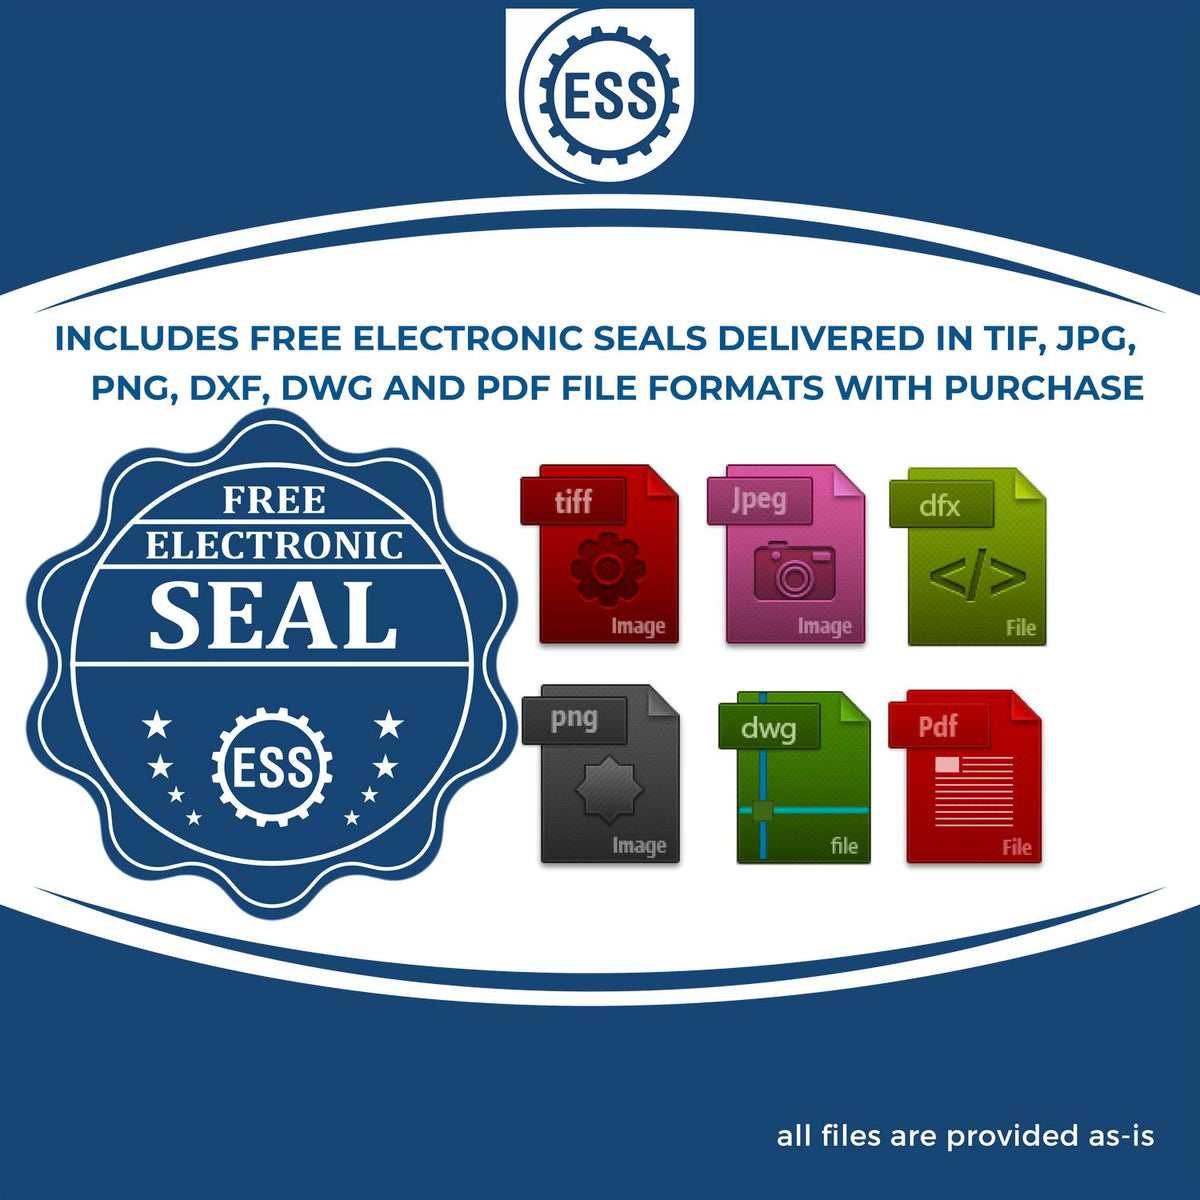 An infographic for the free electronic seal for the State of South Carolina Extended Long Reach Engineer Seal illustrating the different file type icons such as DXF, DWG, TIF, JPG and PNG.